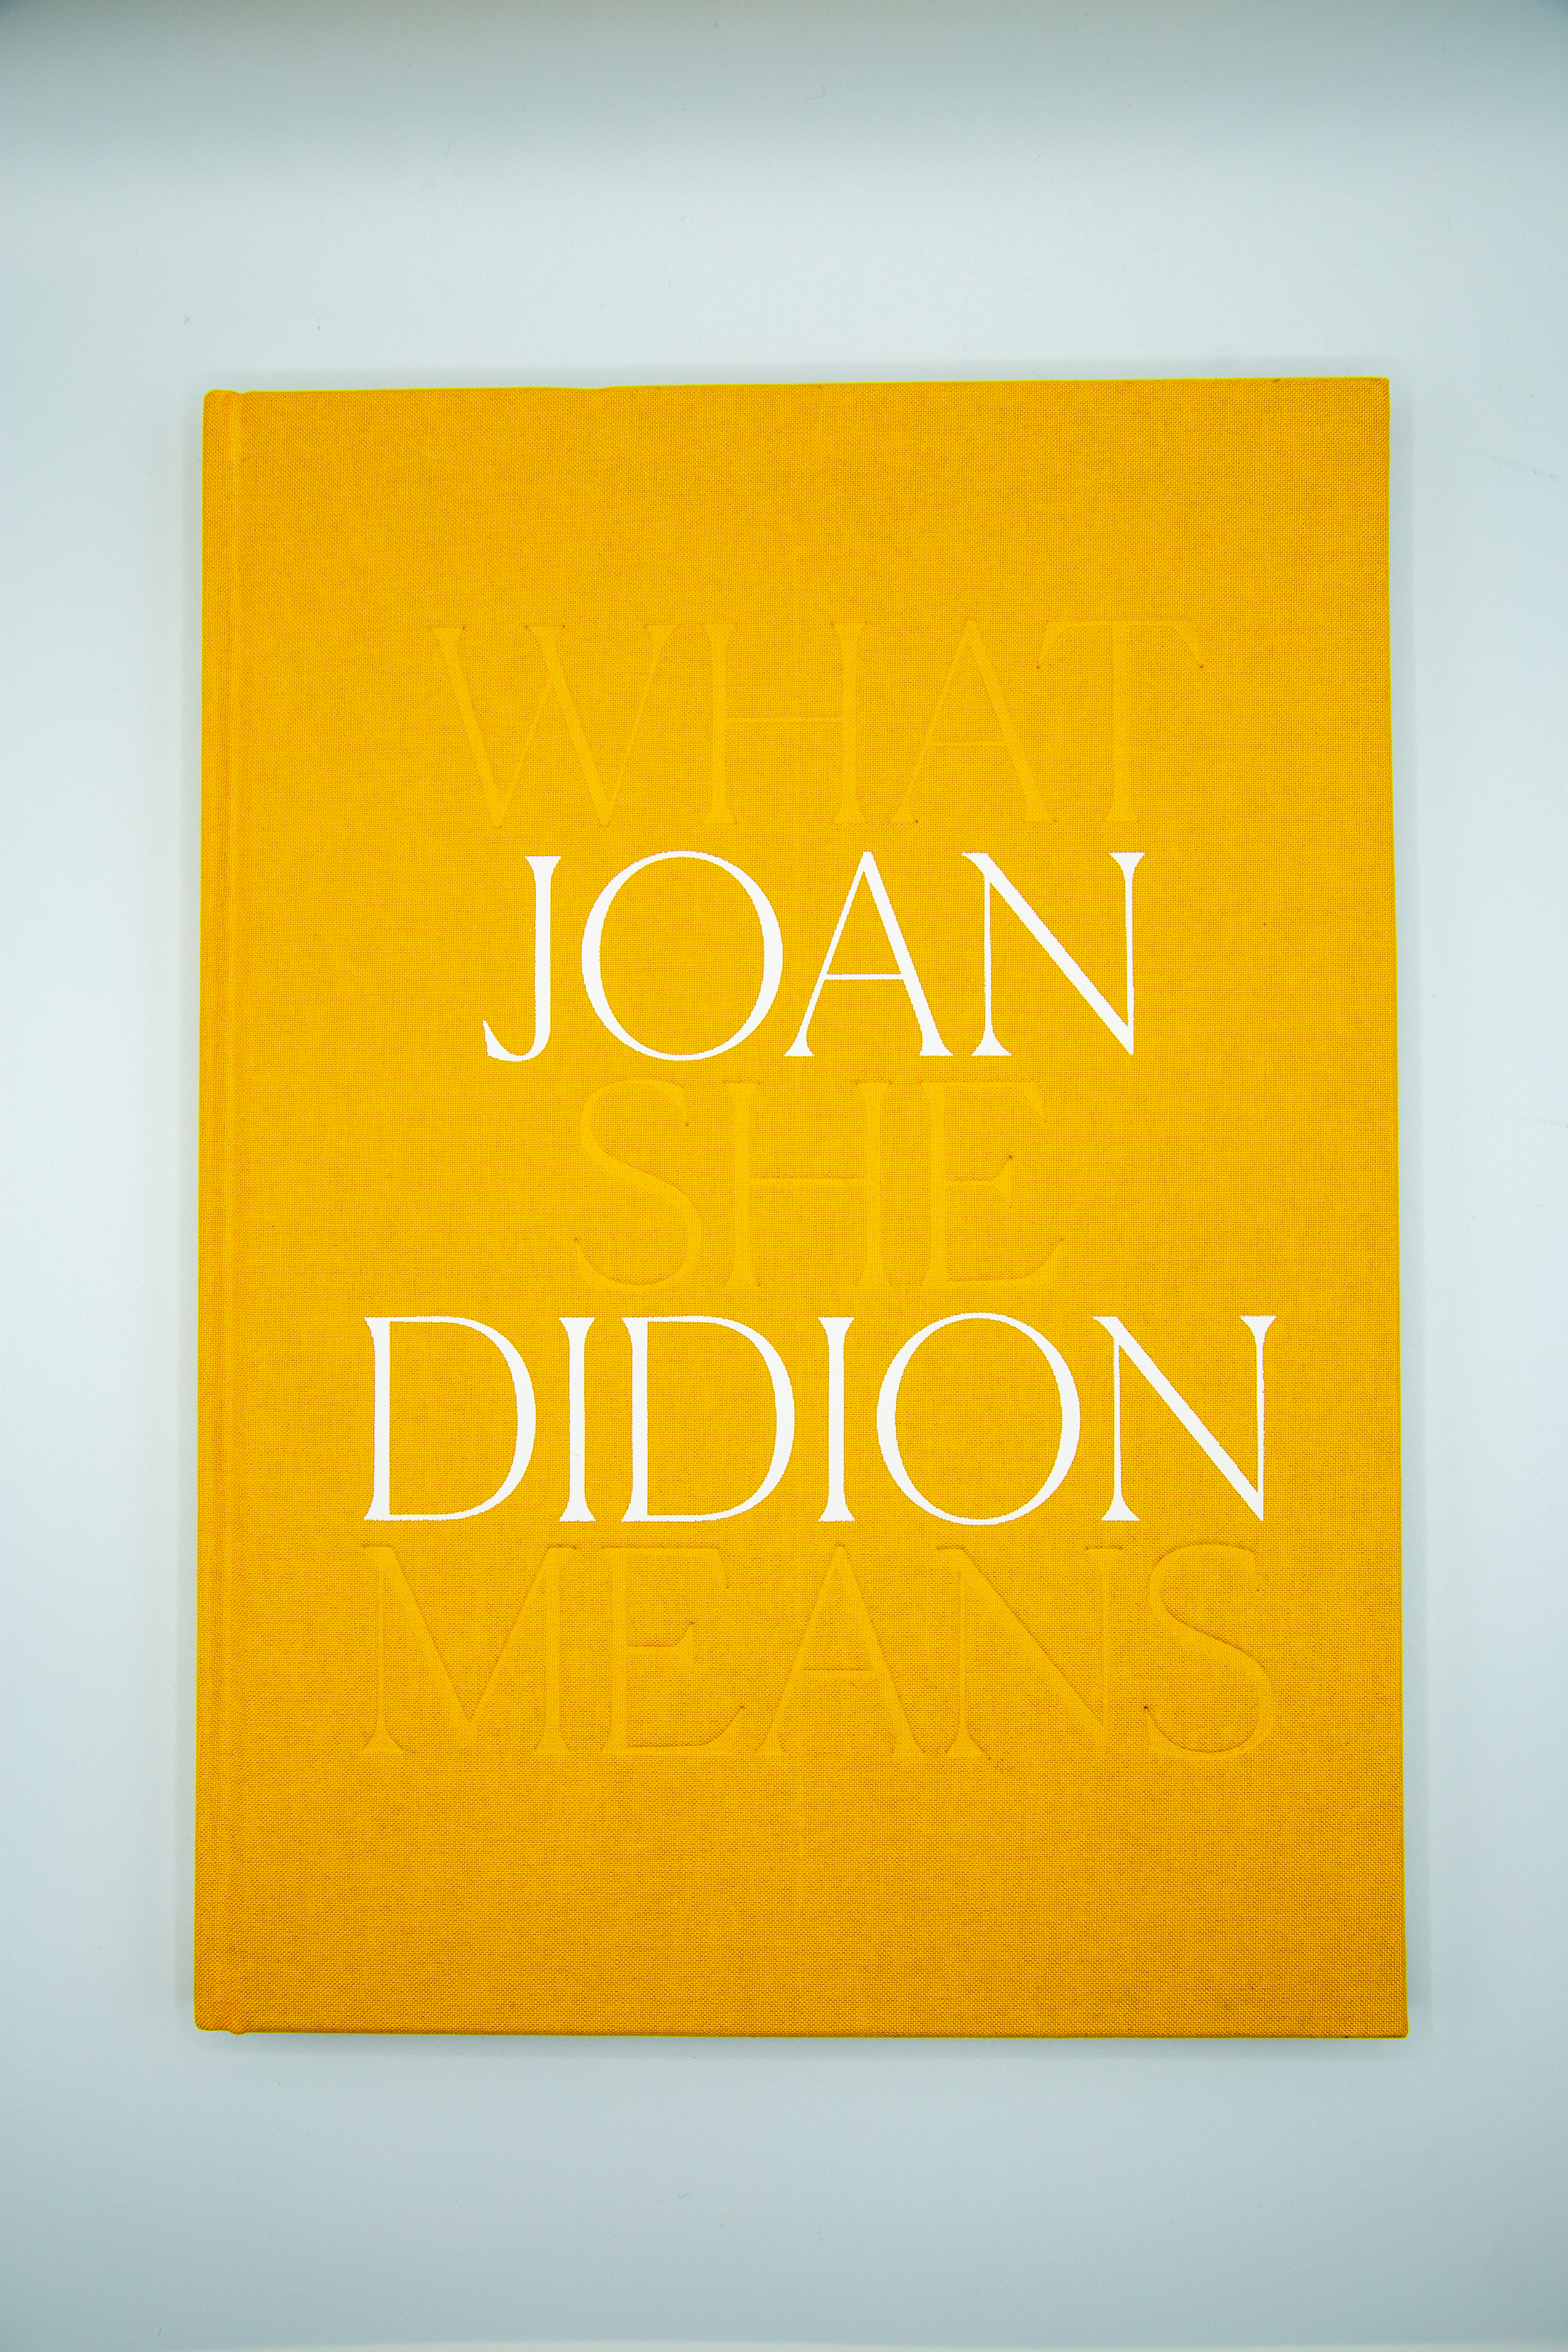 Bright yellow cover of "Joan Didion: What She Means"